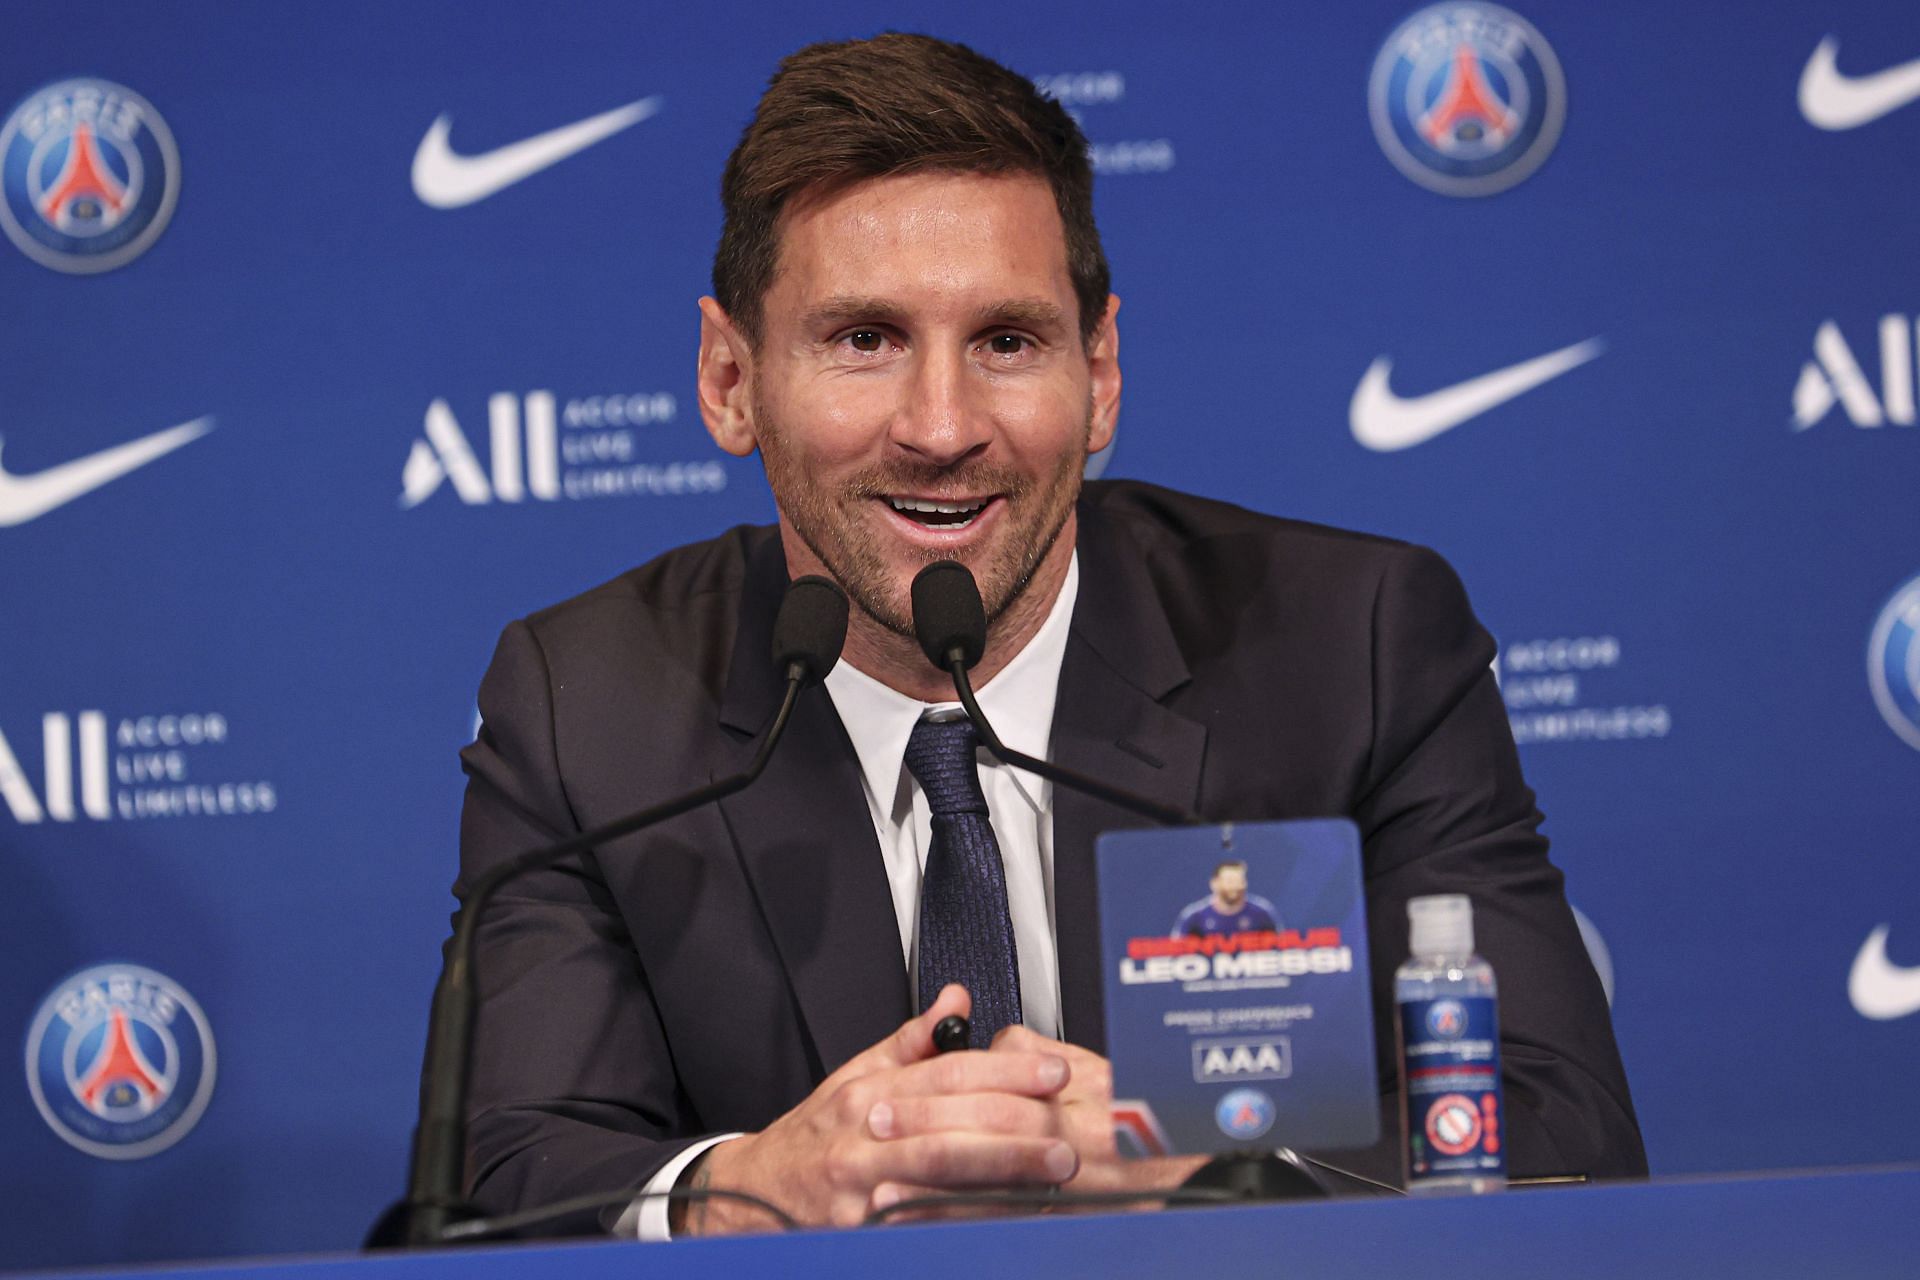 Lionel Messi at press conference answering question